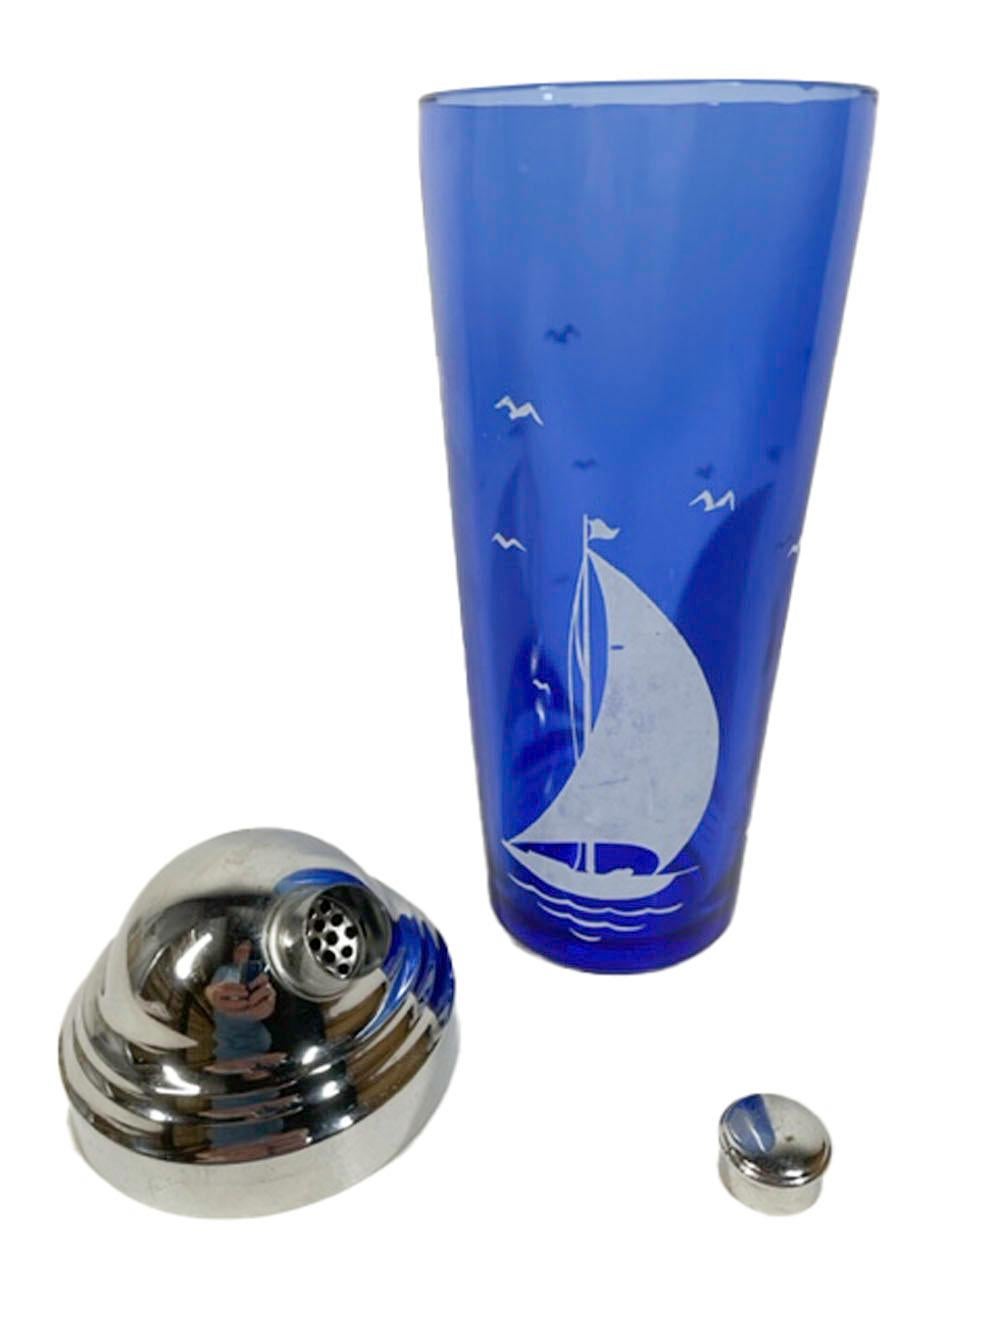 Art Deco, Hazel-Atlas Cocktail Shaker with White Sailboat on Cobalt Glass In Good Condition For Sale In Nantucket, MA